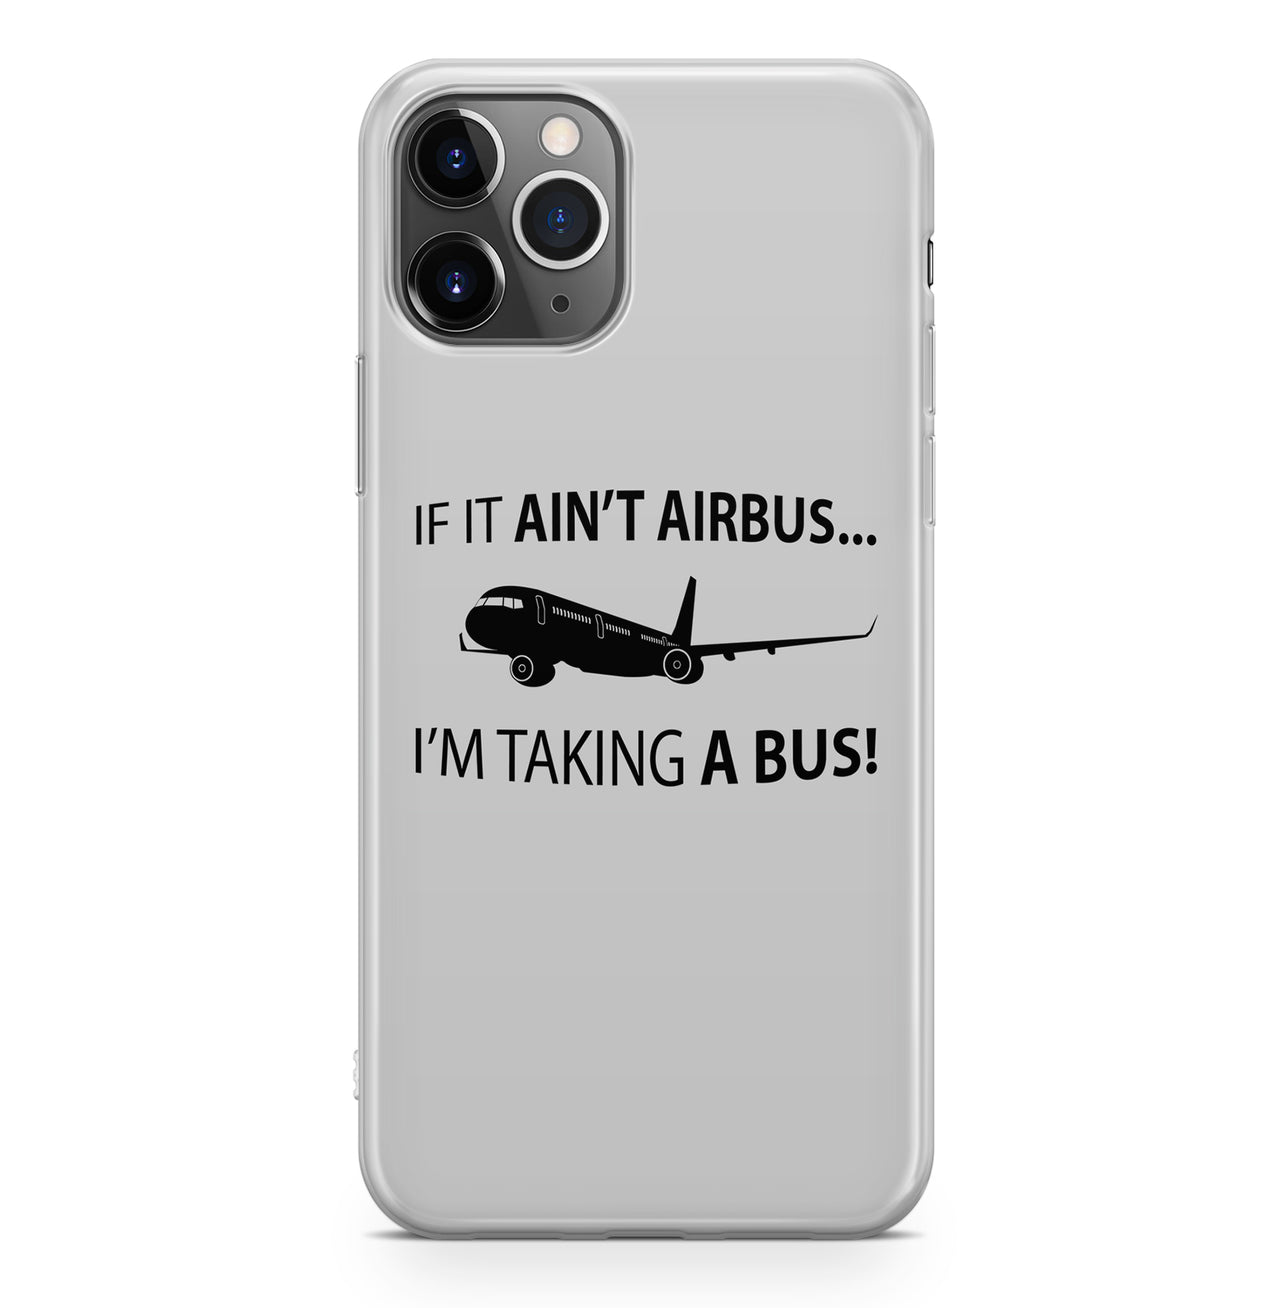 If It Ain't Airbus I'm Taking A Bus Designed iPhone Cases